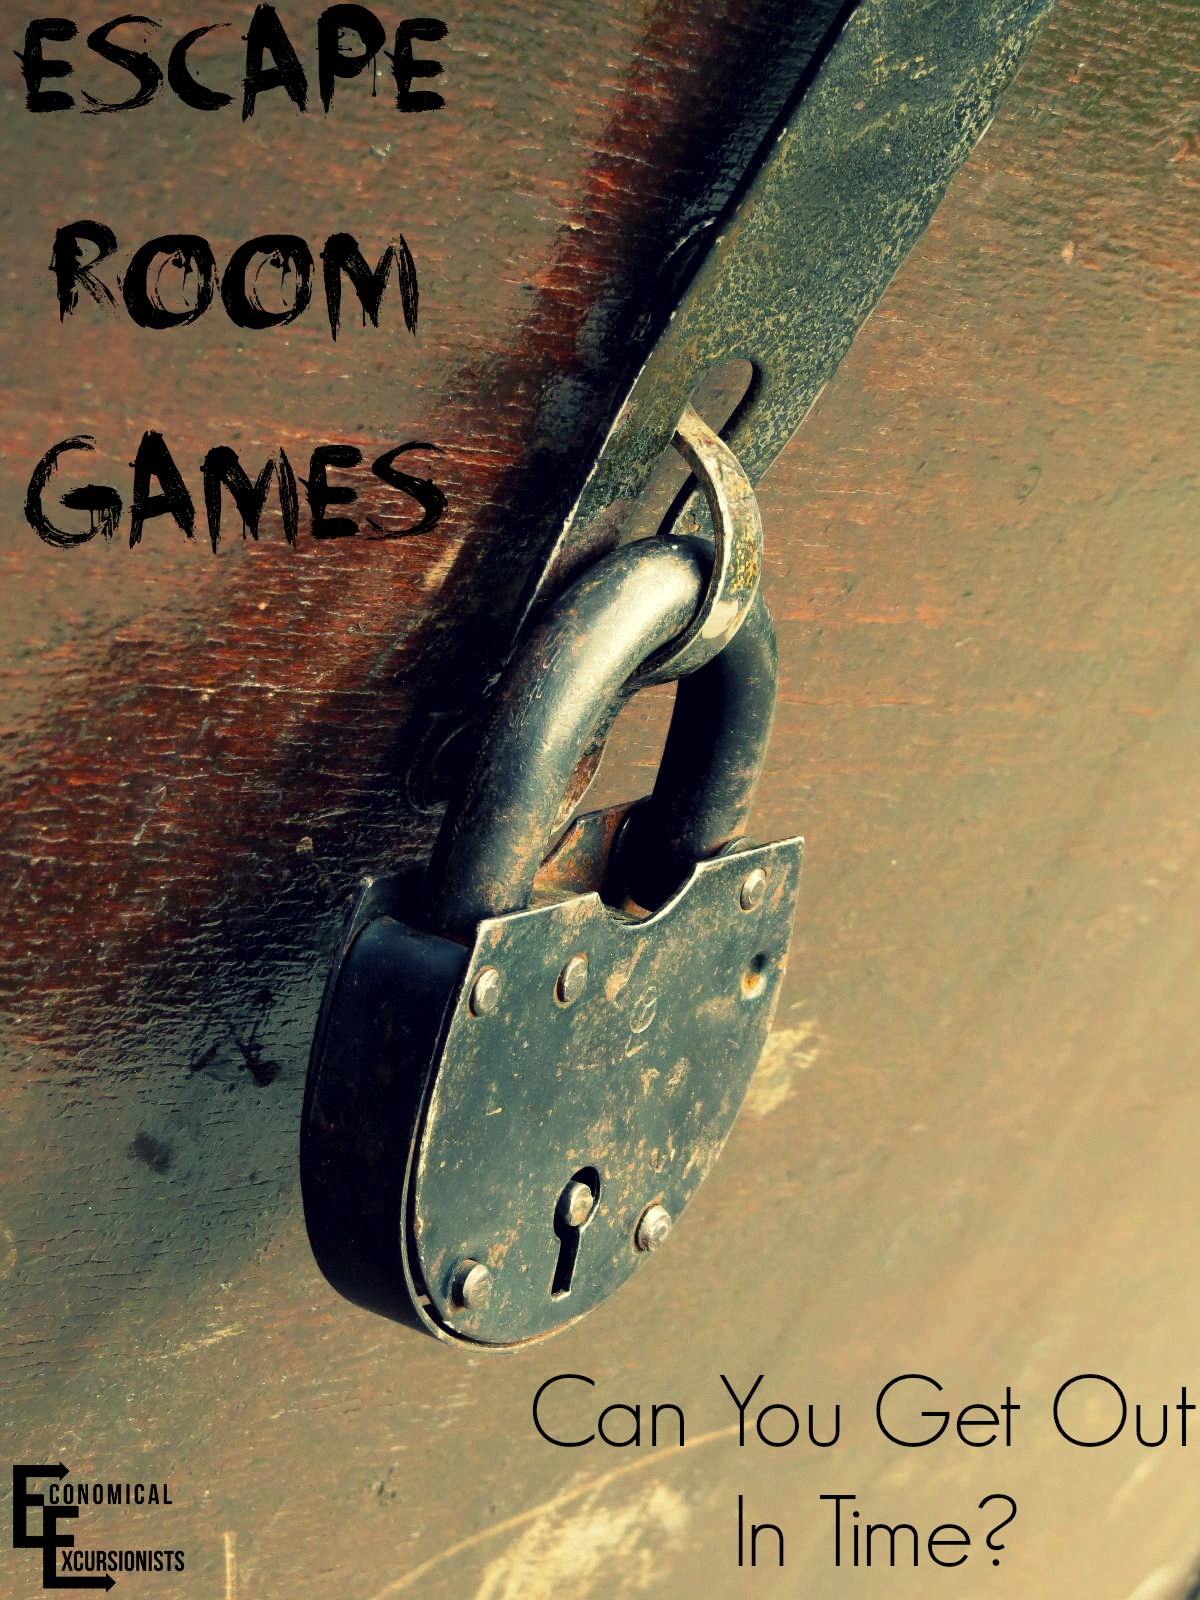 Escape Room Games: The newest trend in real life, interactive games. A blast to do with both friends and family to solve puzzles, codes and secrets